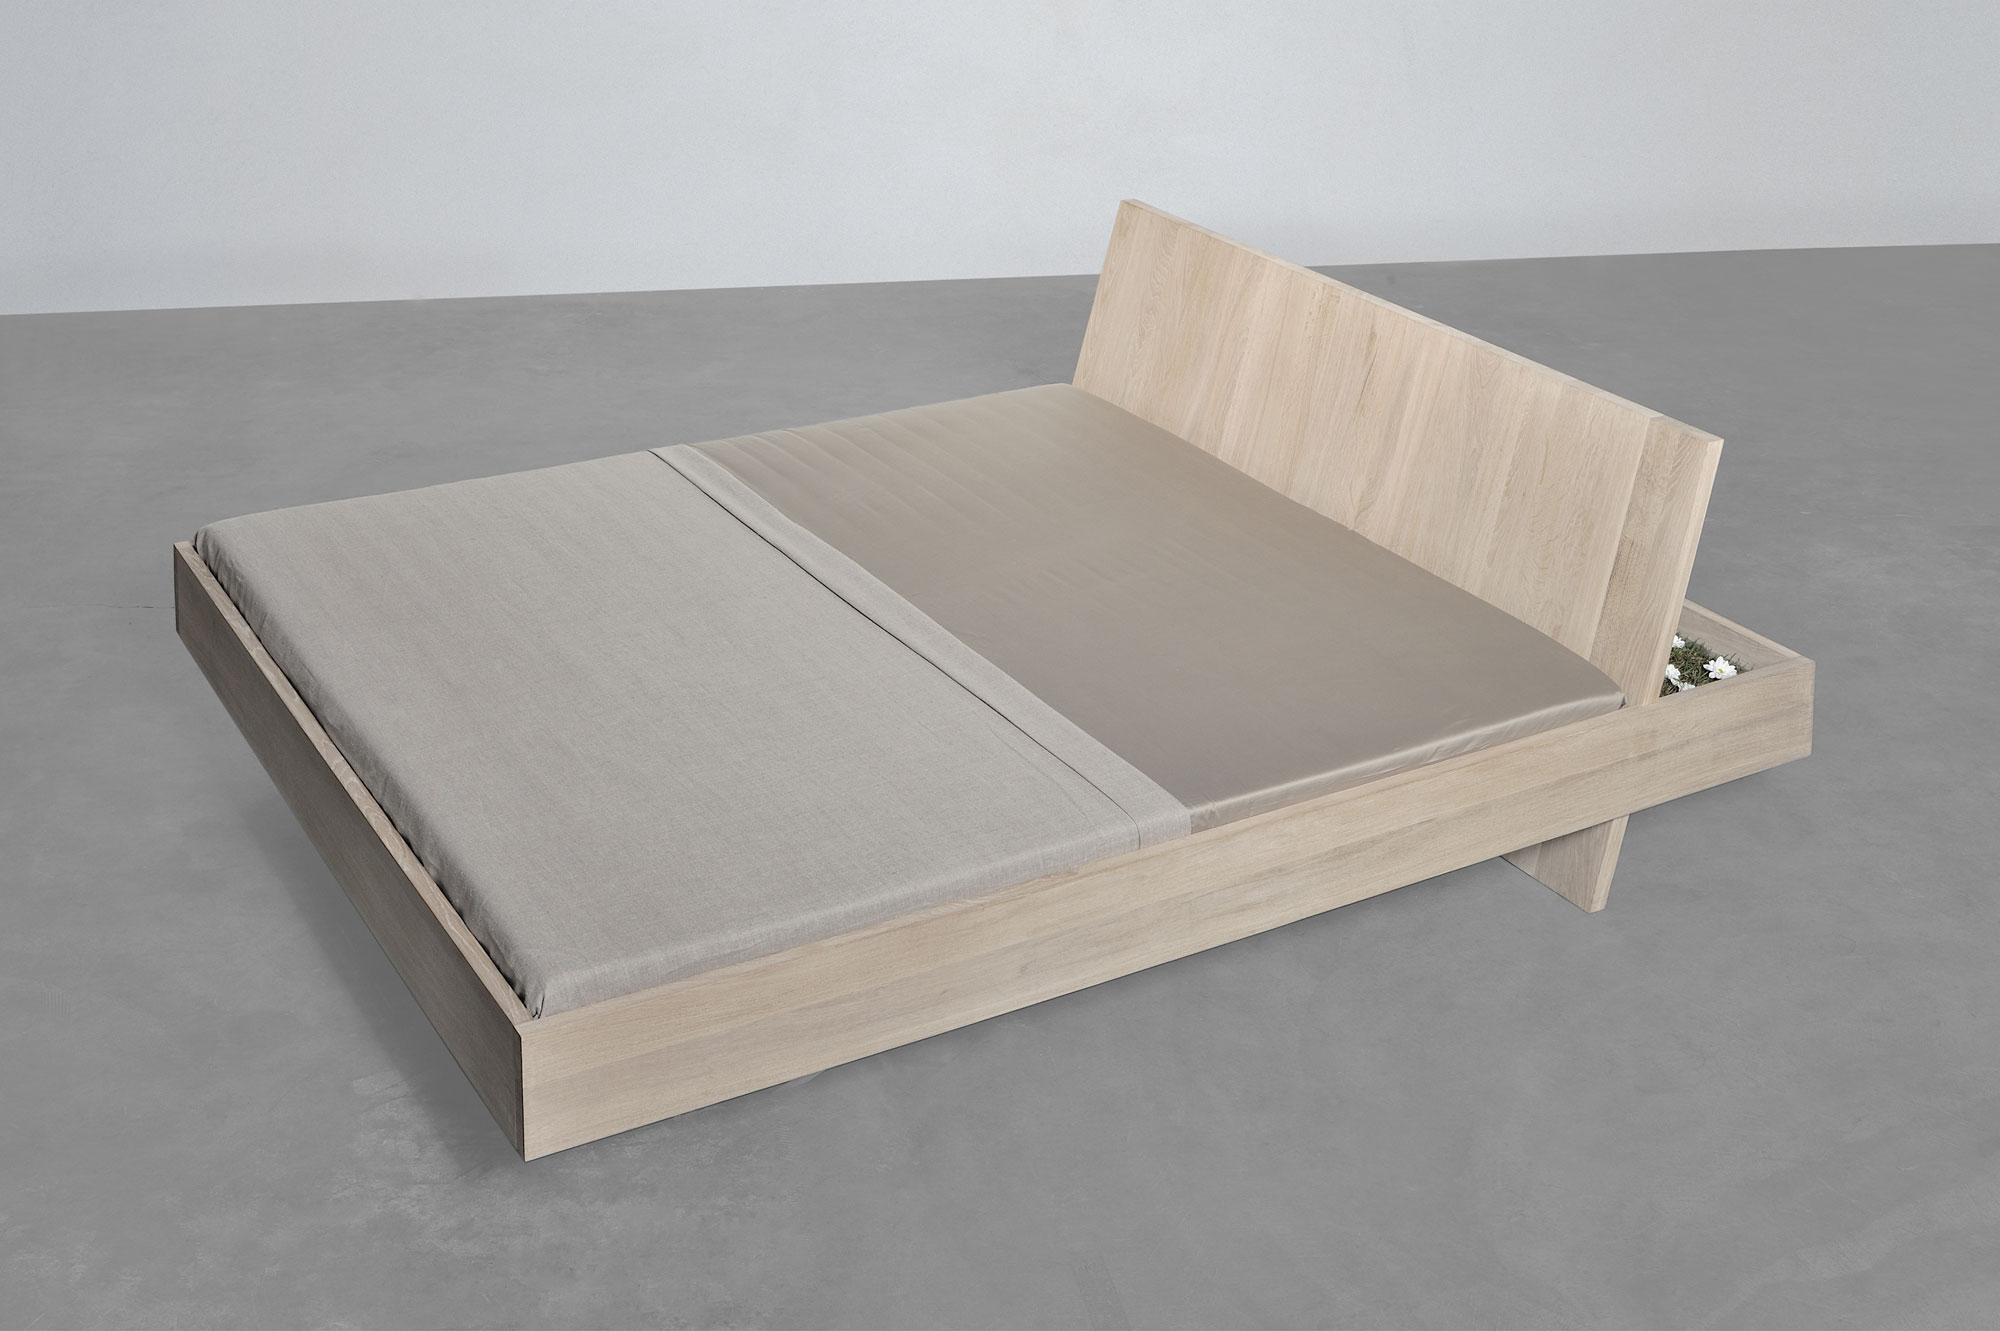 Design Solid Wood Bed SOMNIA 6098 custom made in solid wood by vitamin design